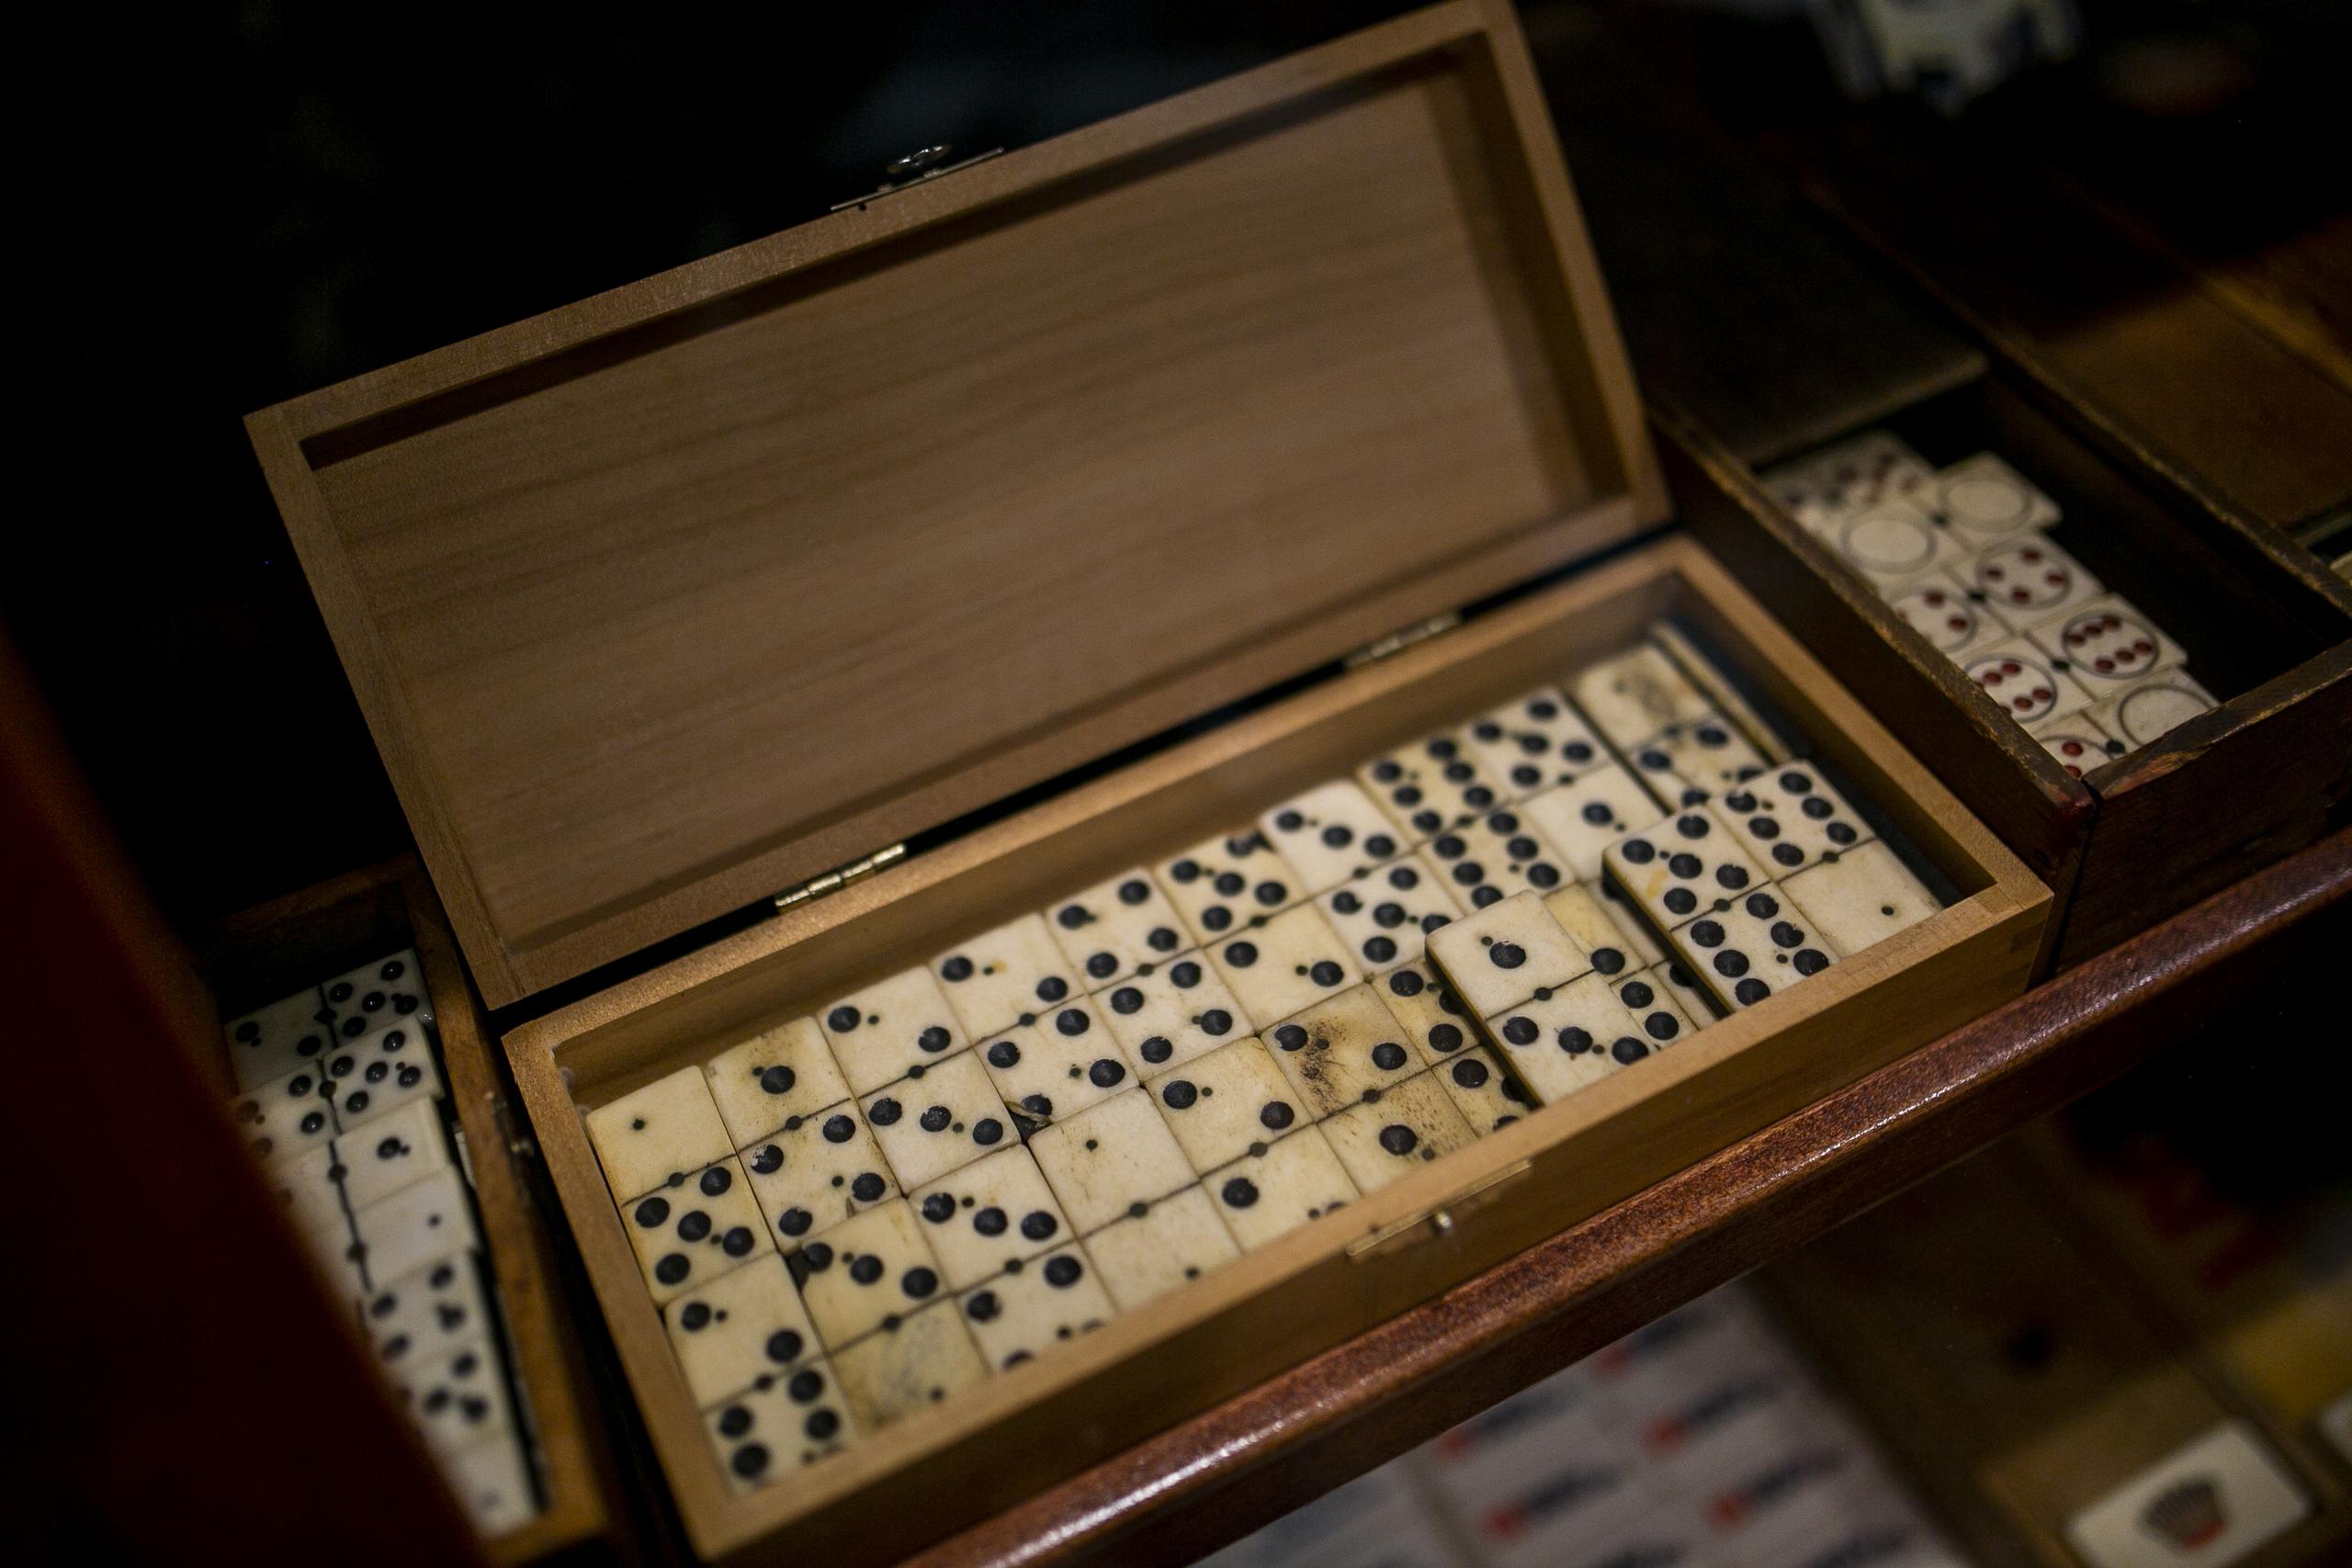 On display are nearly 700 sets of dominoes worth over $1.2 million.